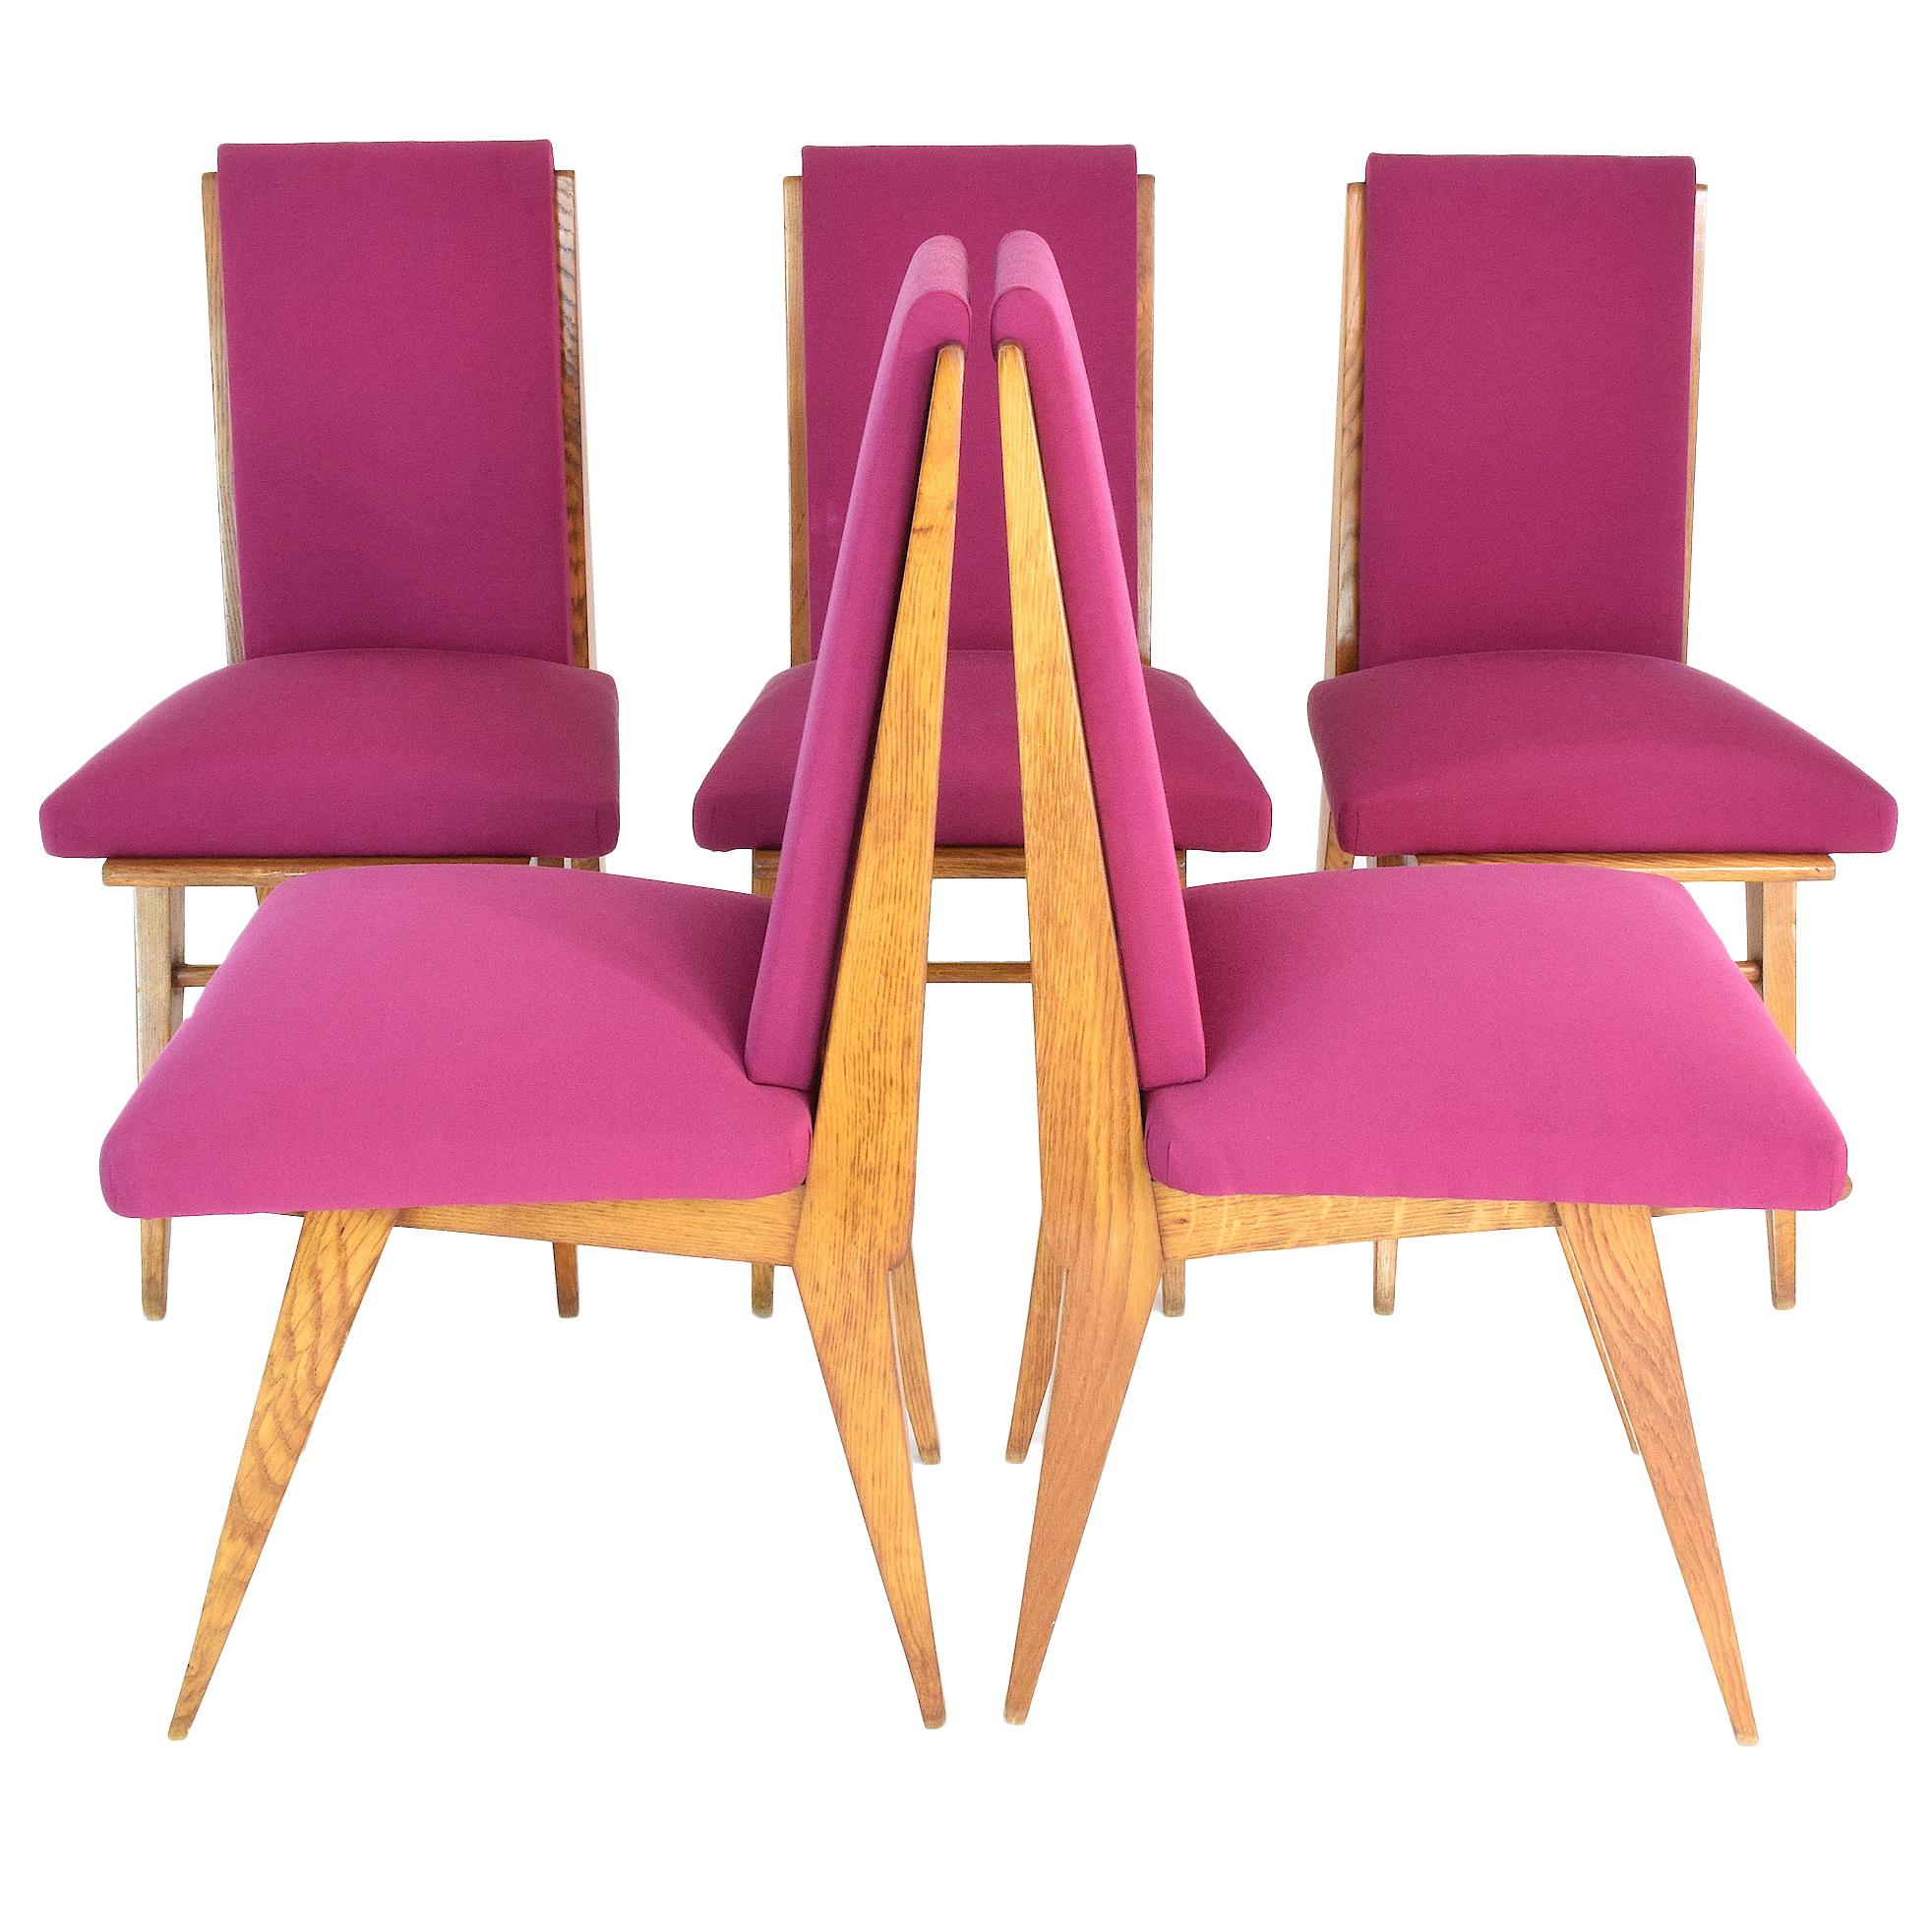 Stylish French 20th-century vintage high-back art deco dining chairs composed of solid oak and splayed,
tapered legs in the style of Charles Dudouyt. 
Entirely restored with a high-quality pink Lelievre Paris cotton fabric and re-finished